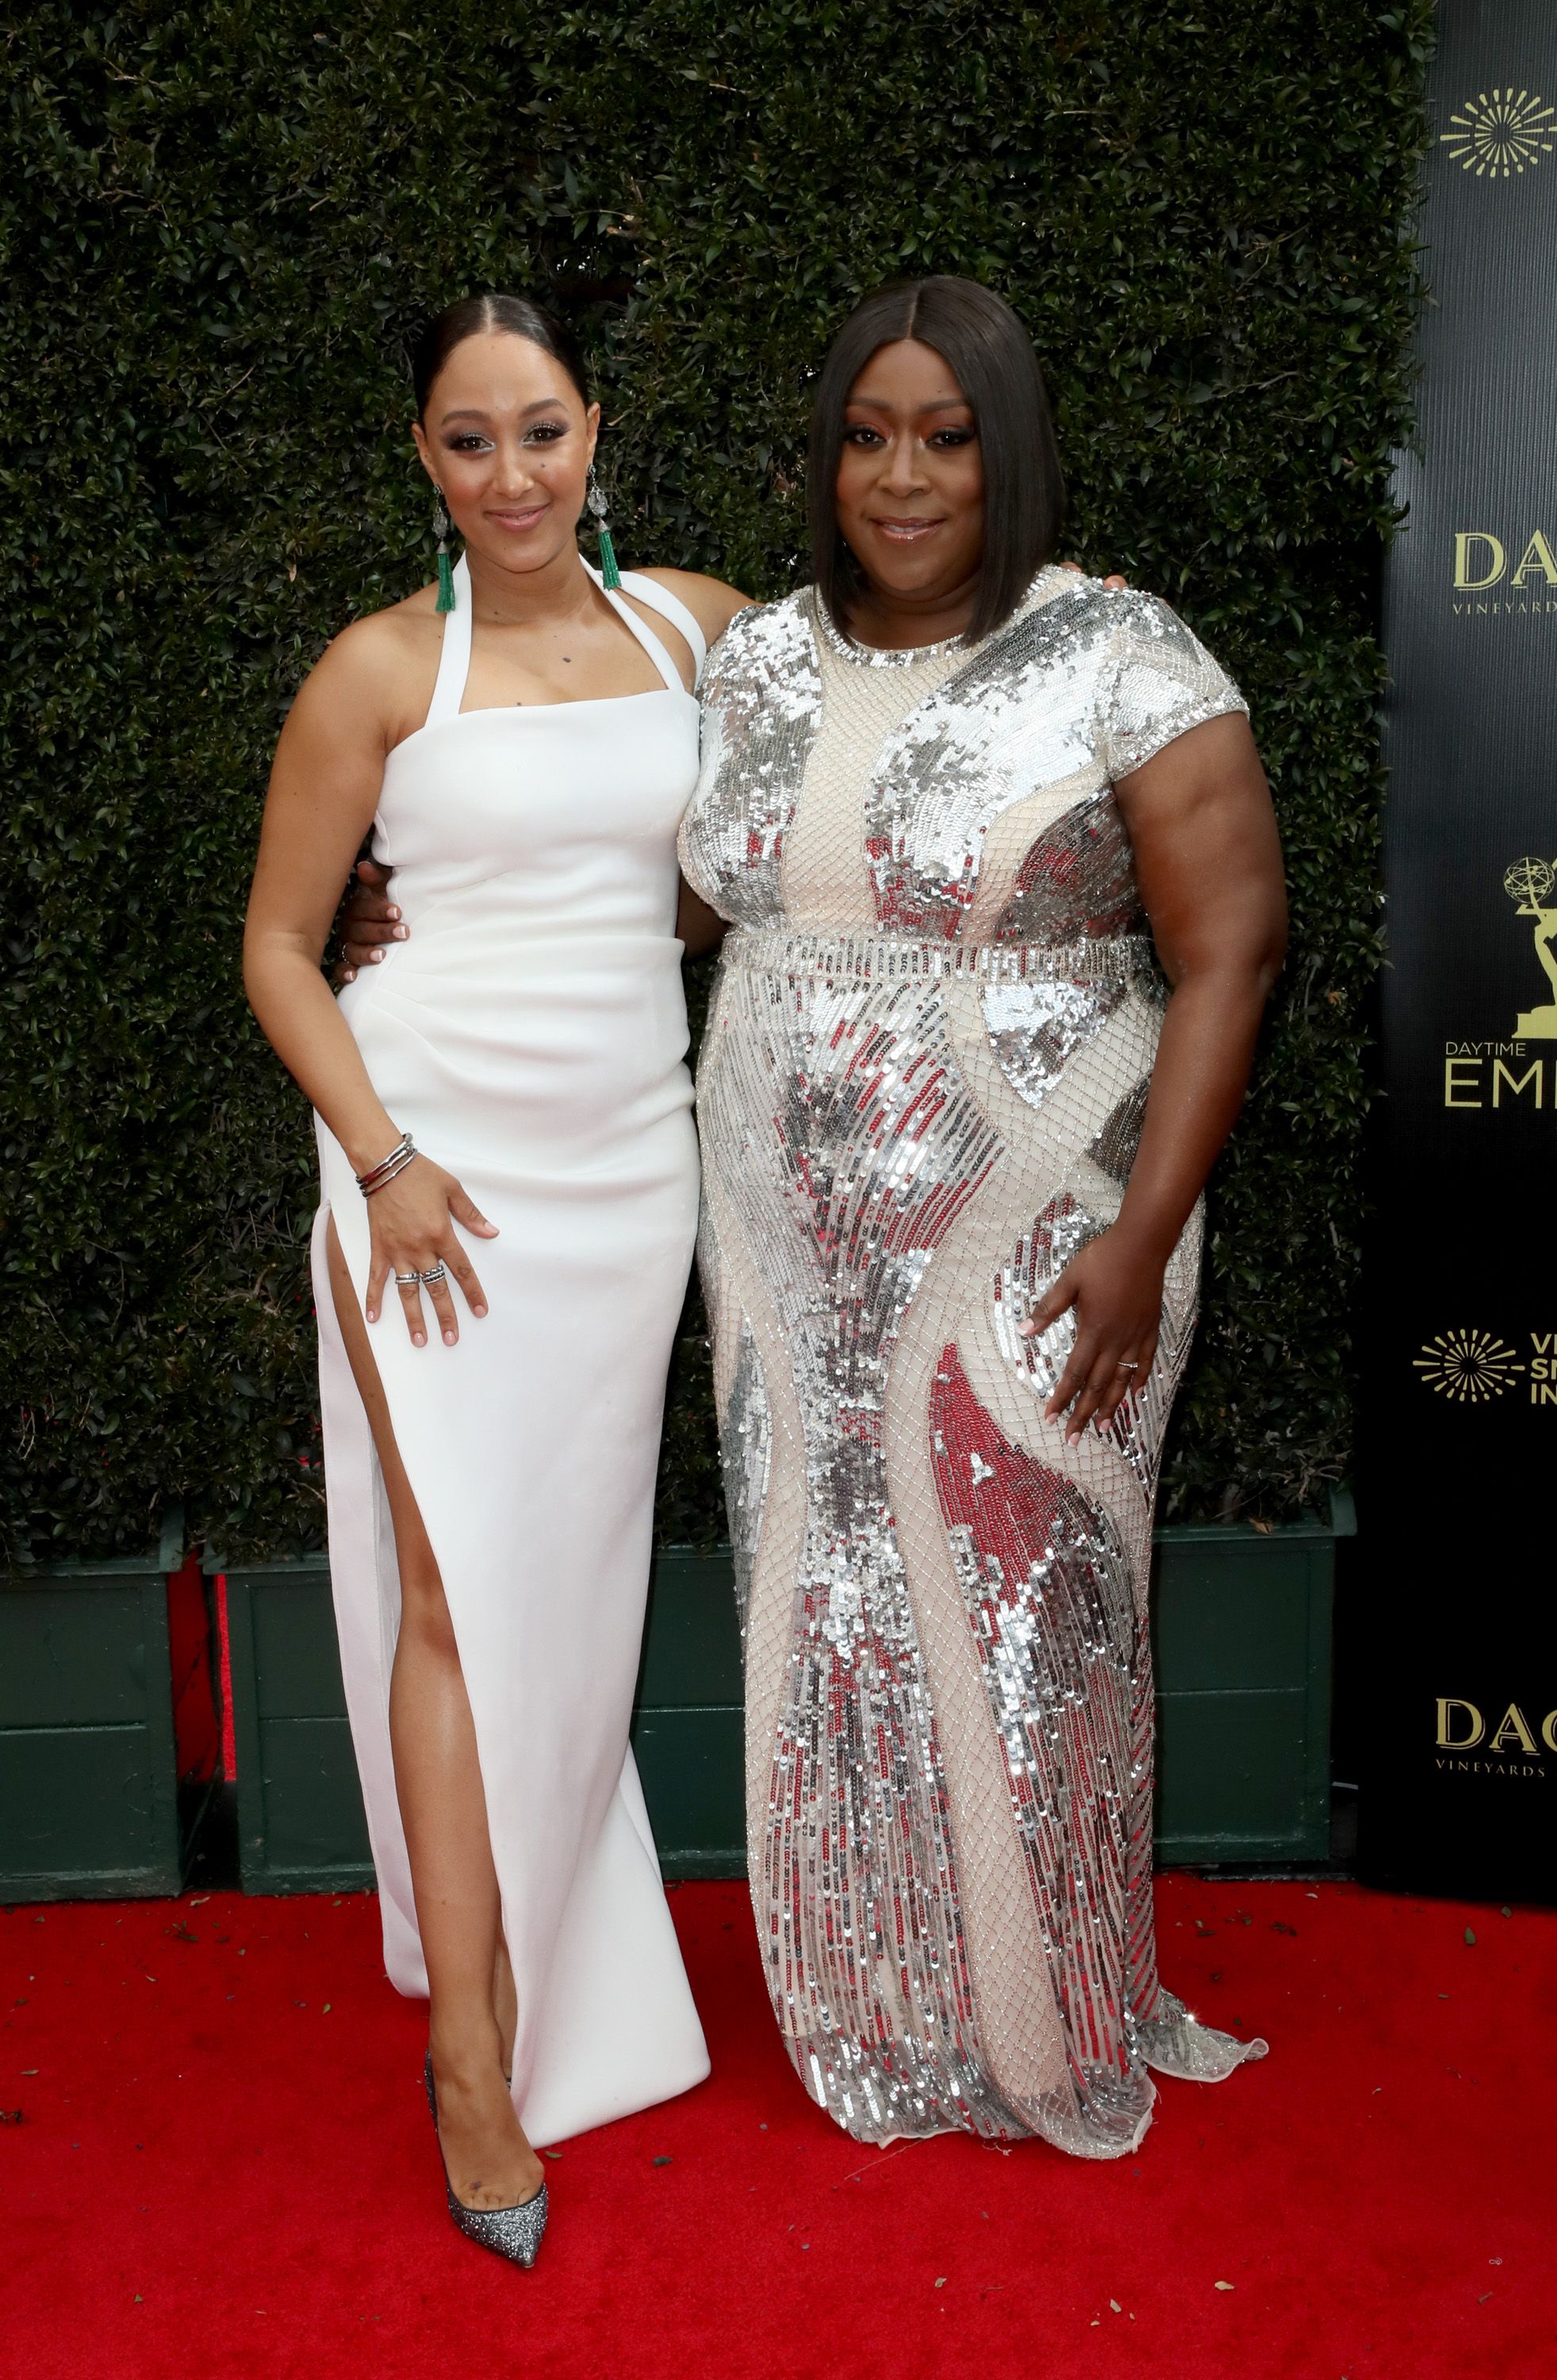 Loni Love and "The Real" co-host Tamera Mowry at the 2019 Emmy Daytime Awards/ Source: Getty Images